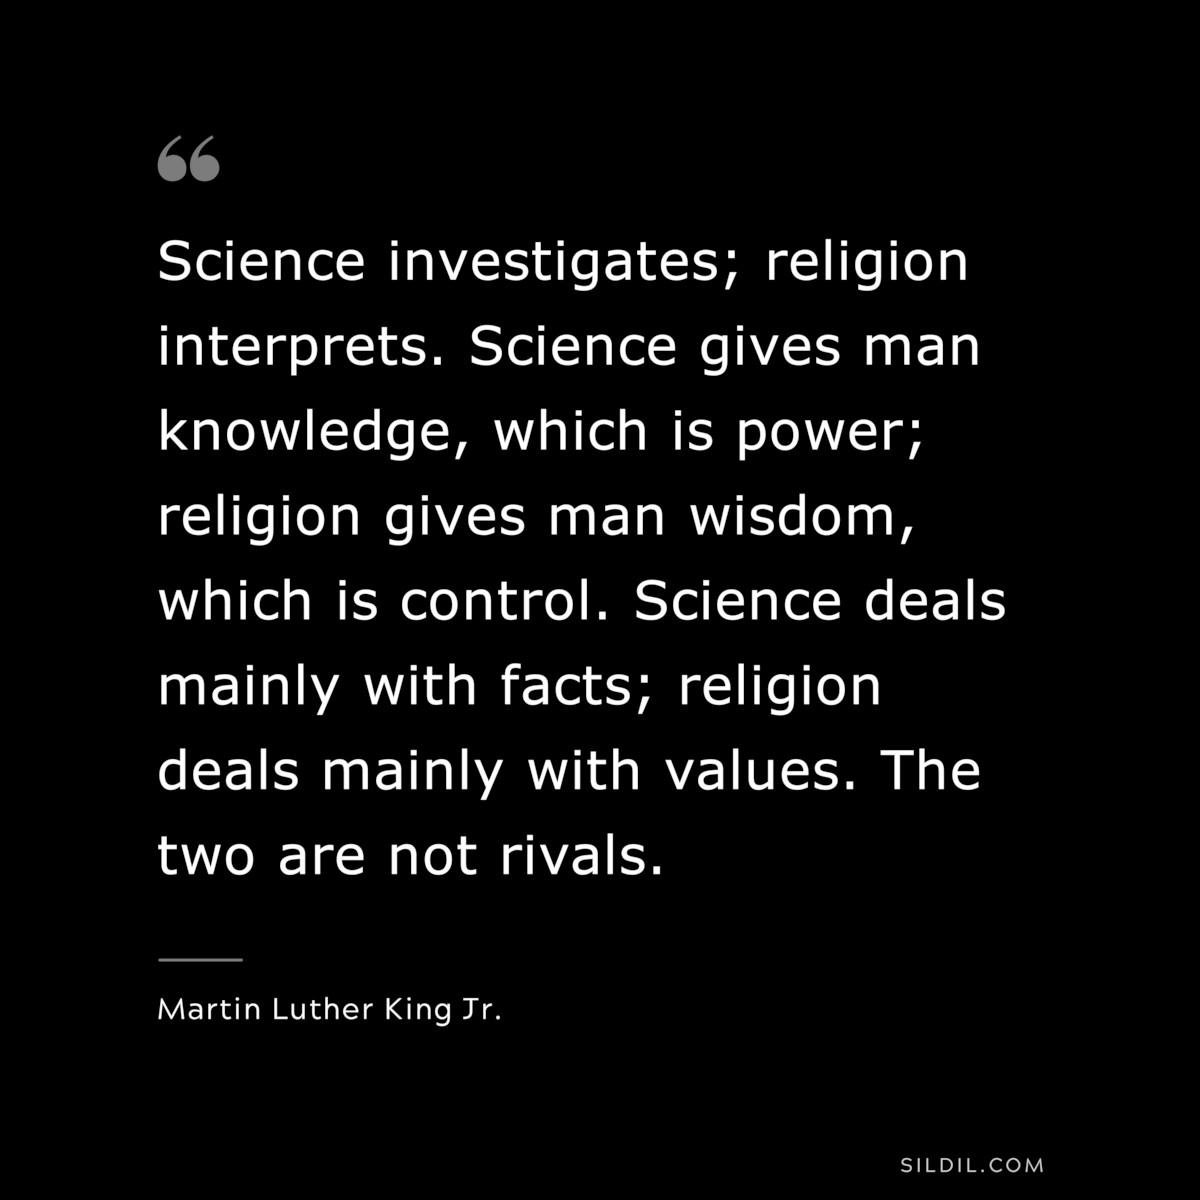 Science investigates; religion interprets. Science gives man knowledge, which is power; religion gives man wisdom, which is control. Science deals mainly with facts; religion deals mainly with values. The two are not rivals. ― Martin Luther King Jr.